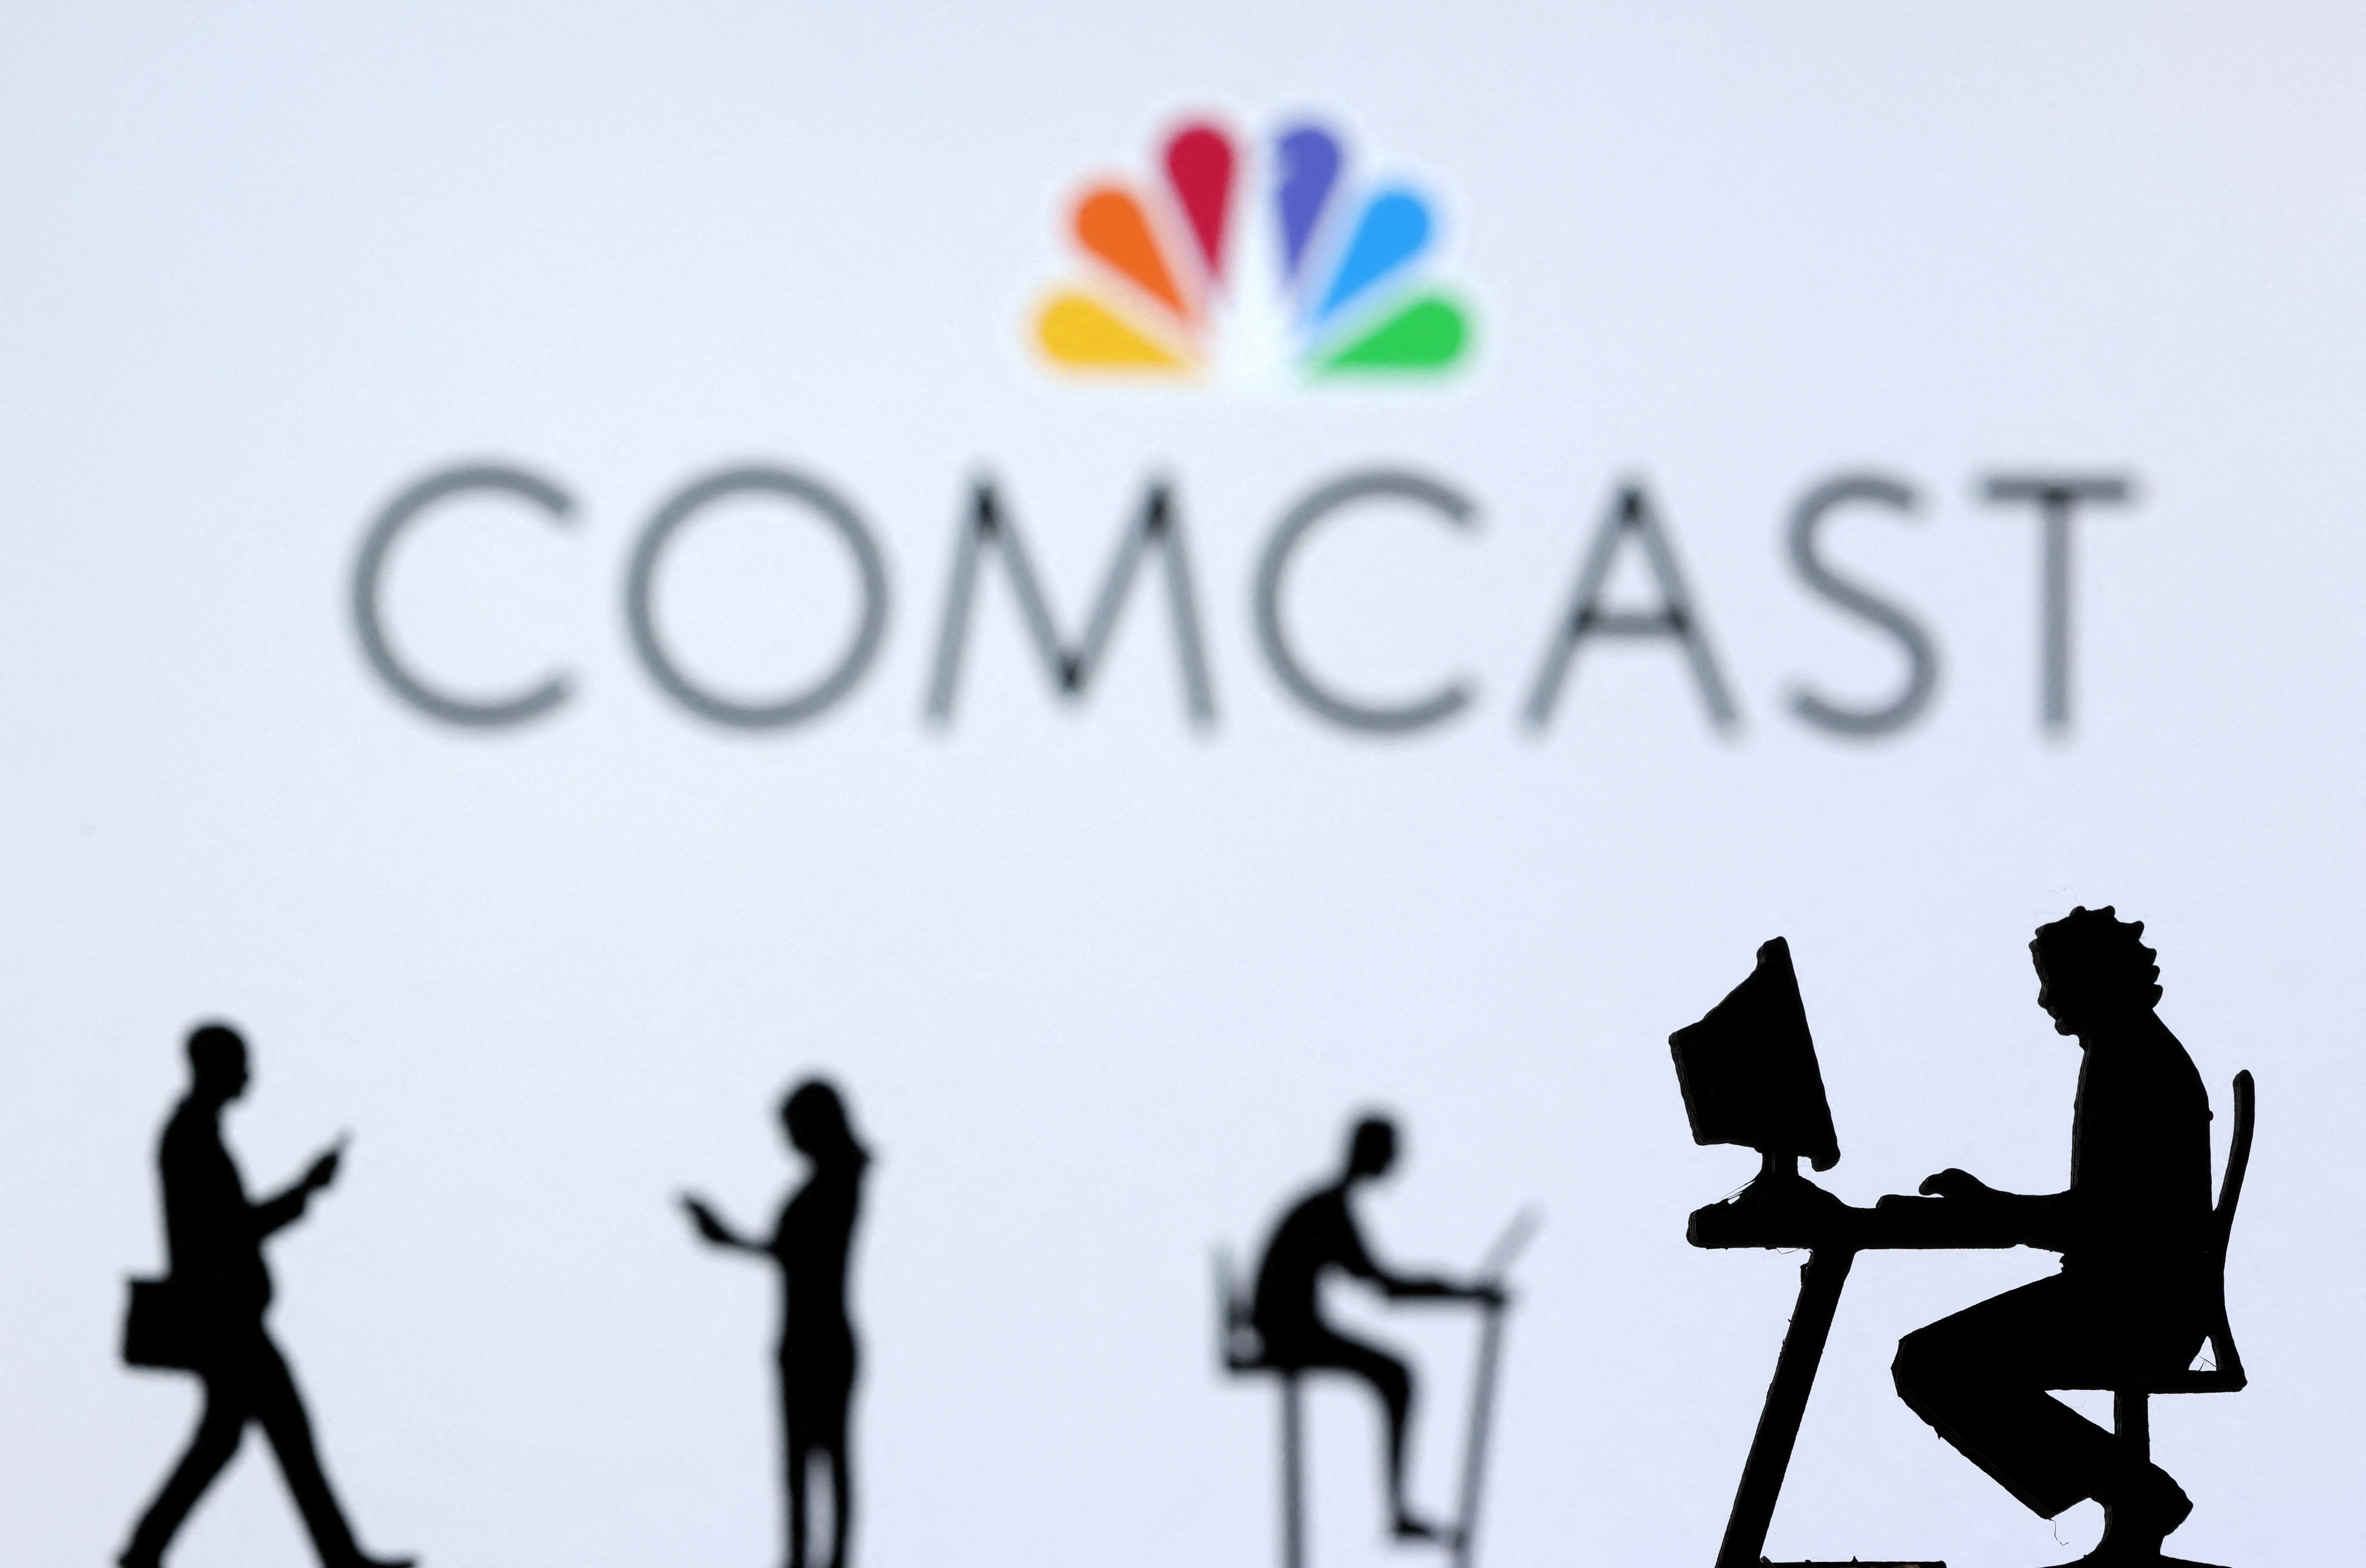 Illustration shows small toy figures with laptops and smartphones in front of displayed Comcast logo